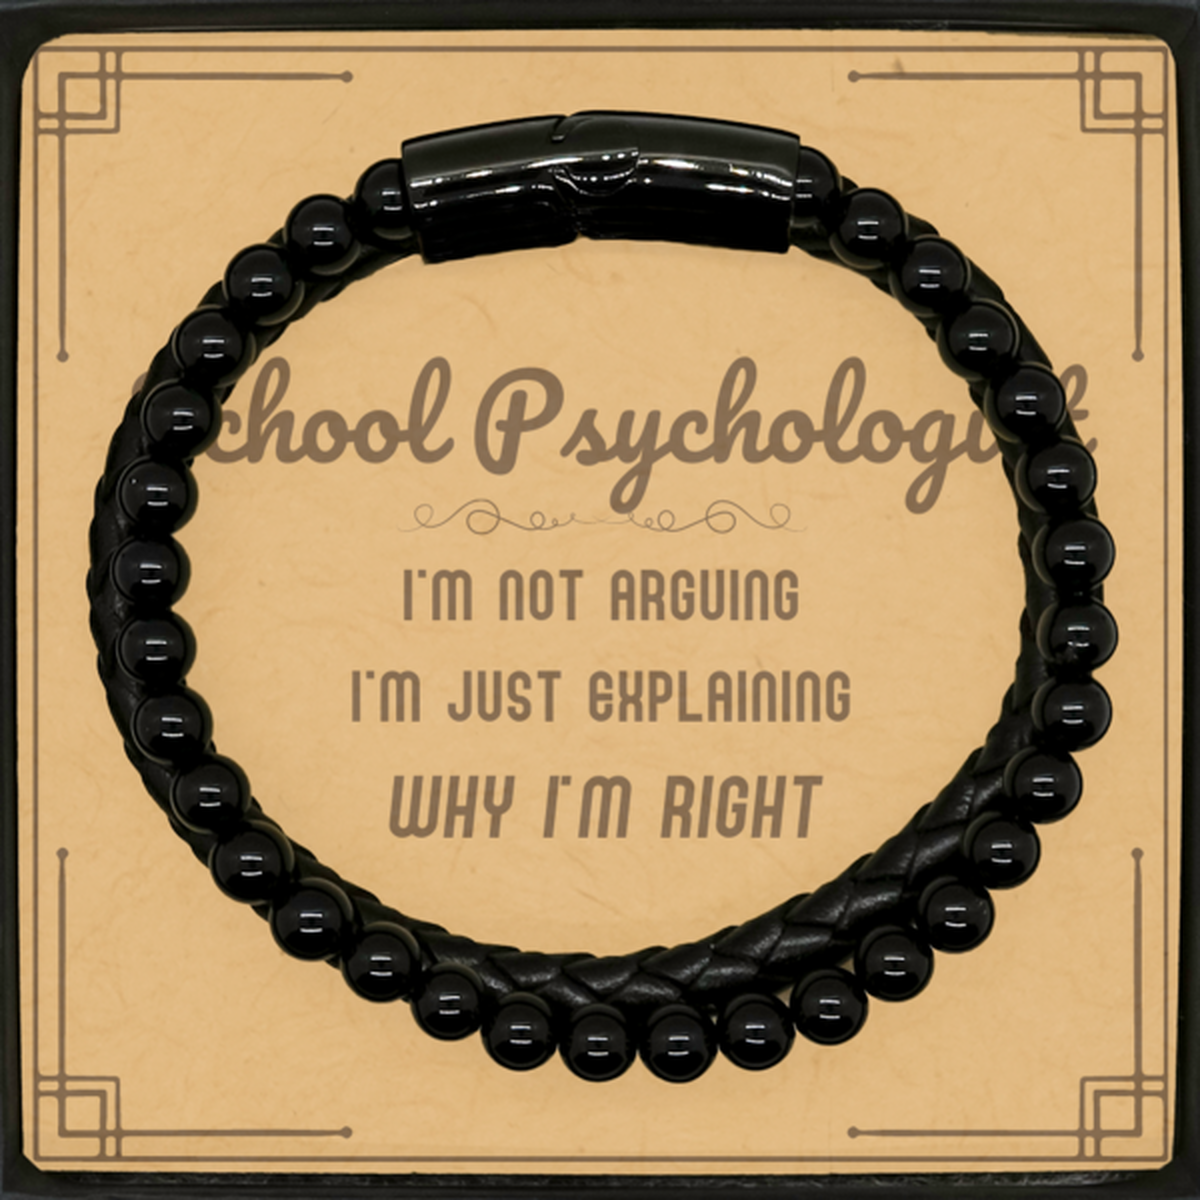 School Psychologist I'm not Arguing. I'm Just Explaining Why I'm RIGHT Stone Leather Bracelets, Funny Saying Quote School Psychologist Gifts For School Psychologist Message Card Graduation Birthday Christmas Gifts for Men Women Coworker